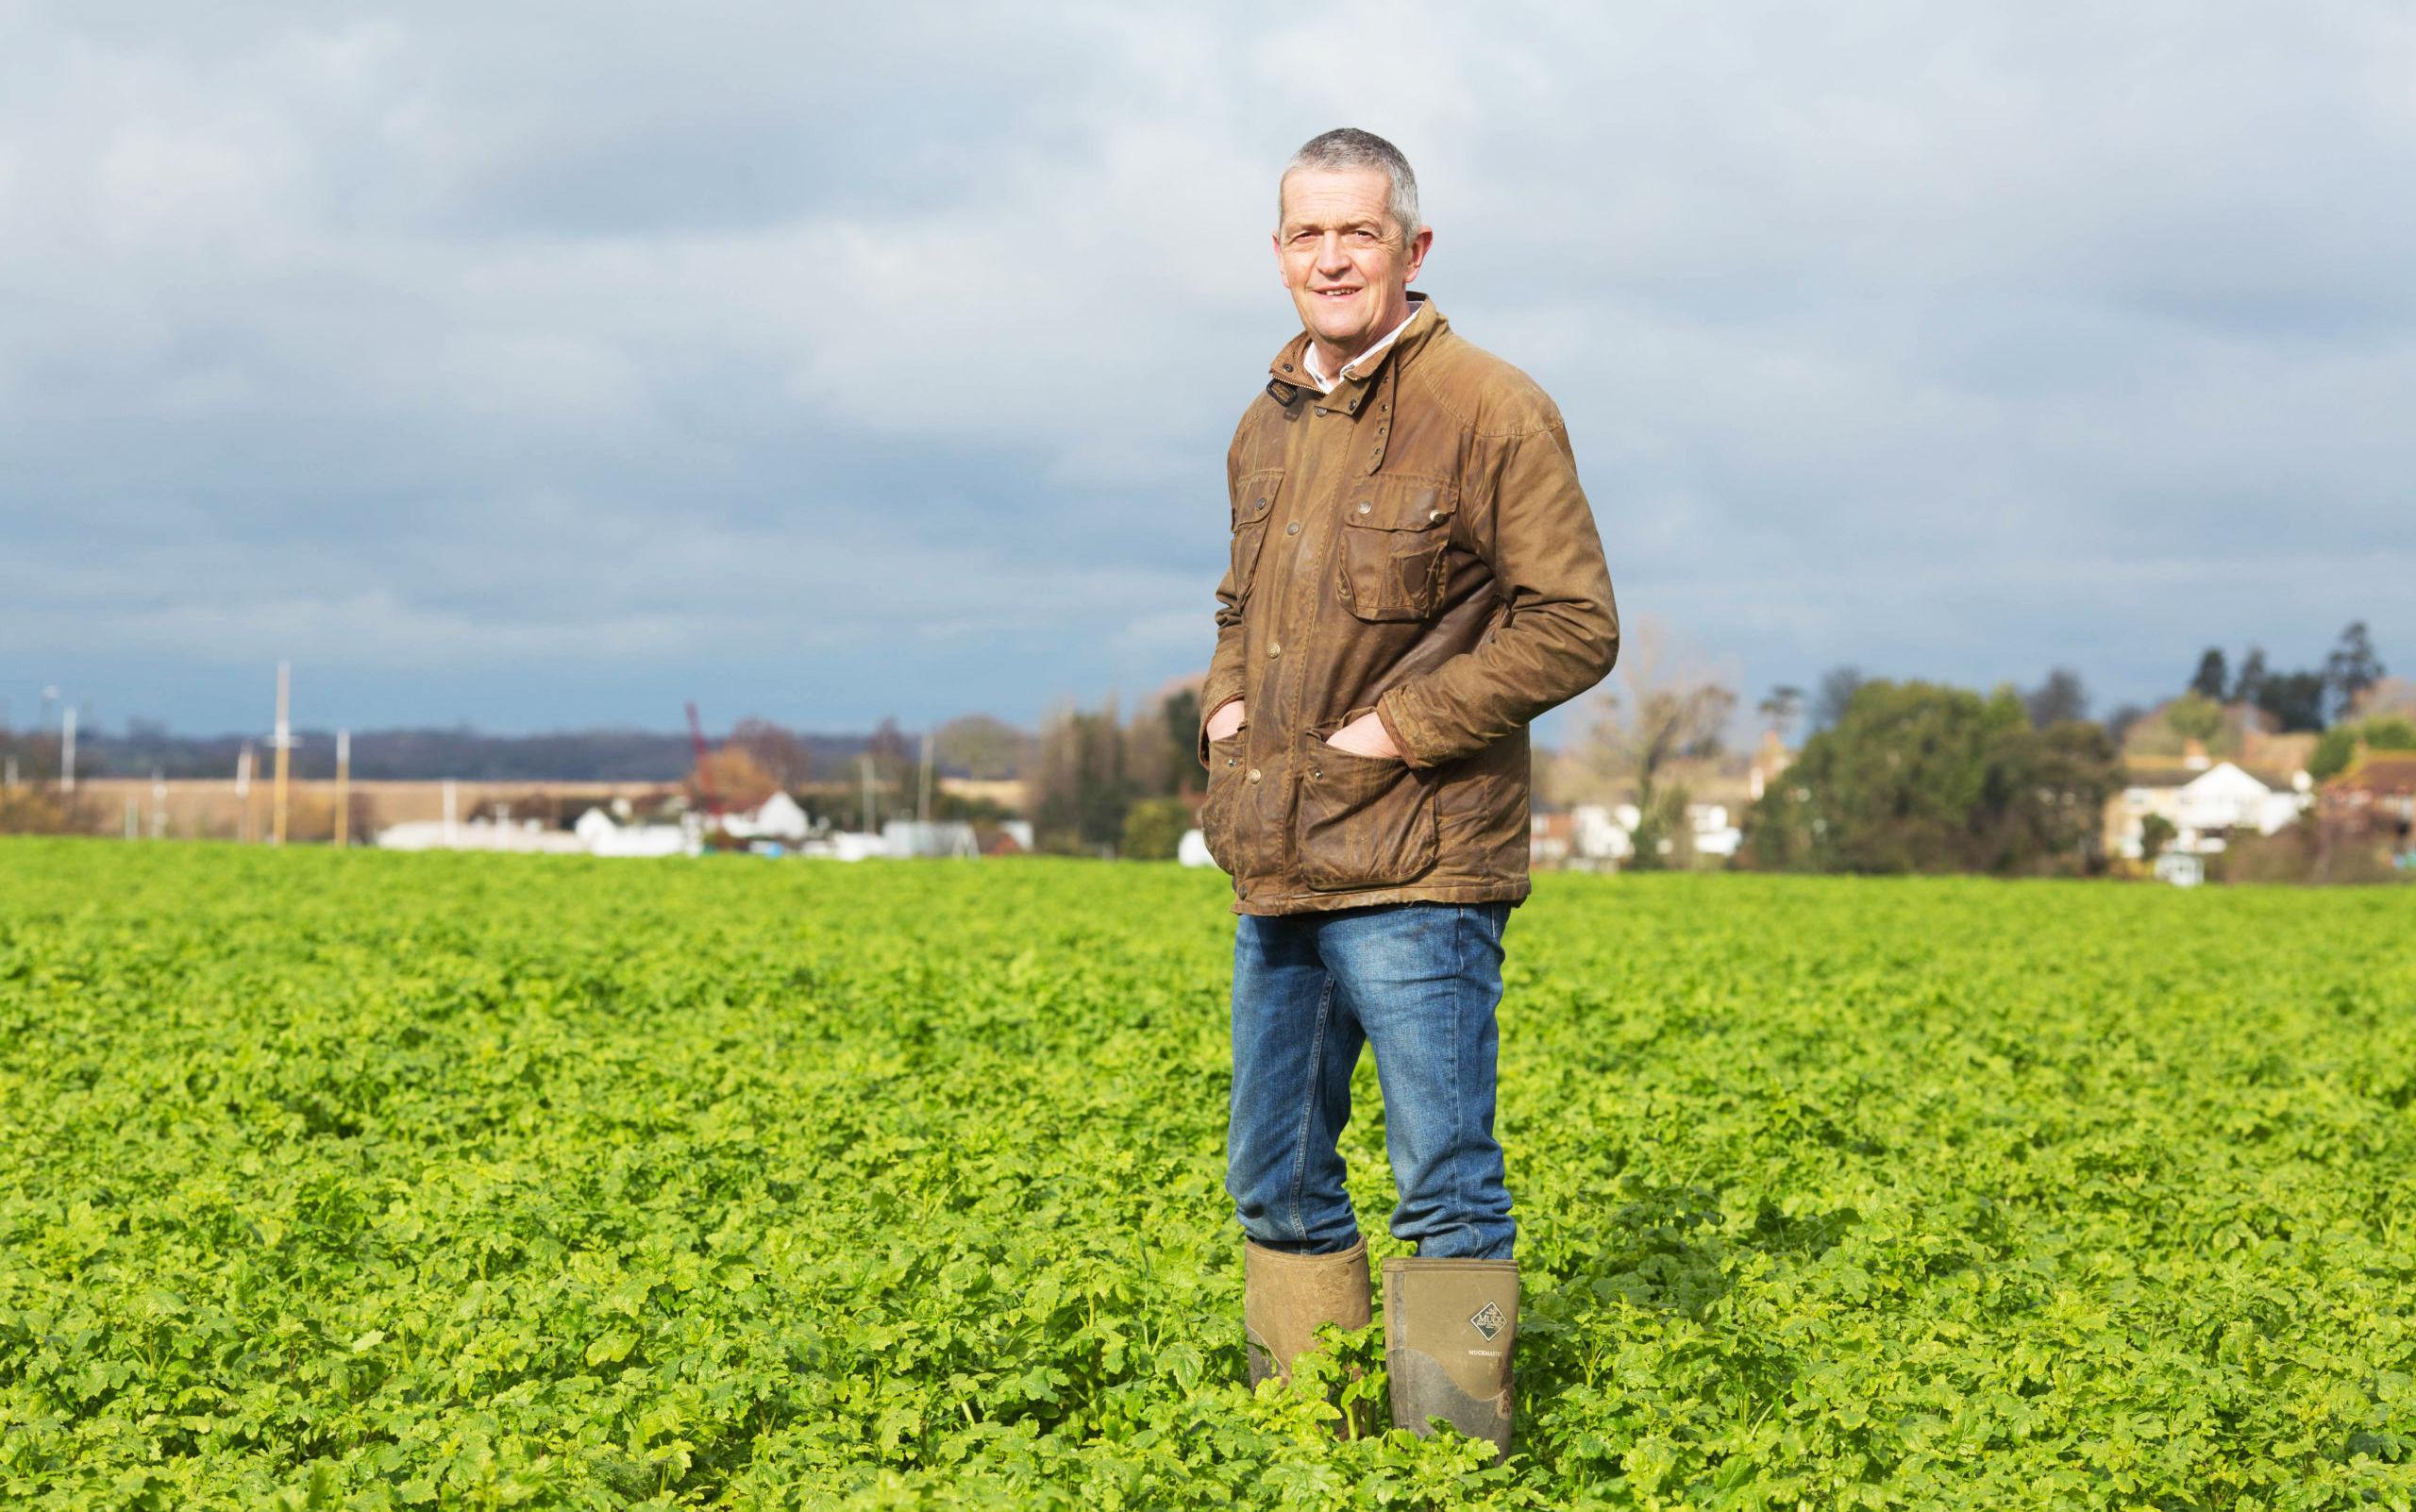 Guy Smith, Red Tractor combinable crops and sugar beet chair